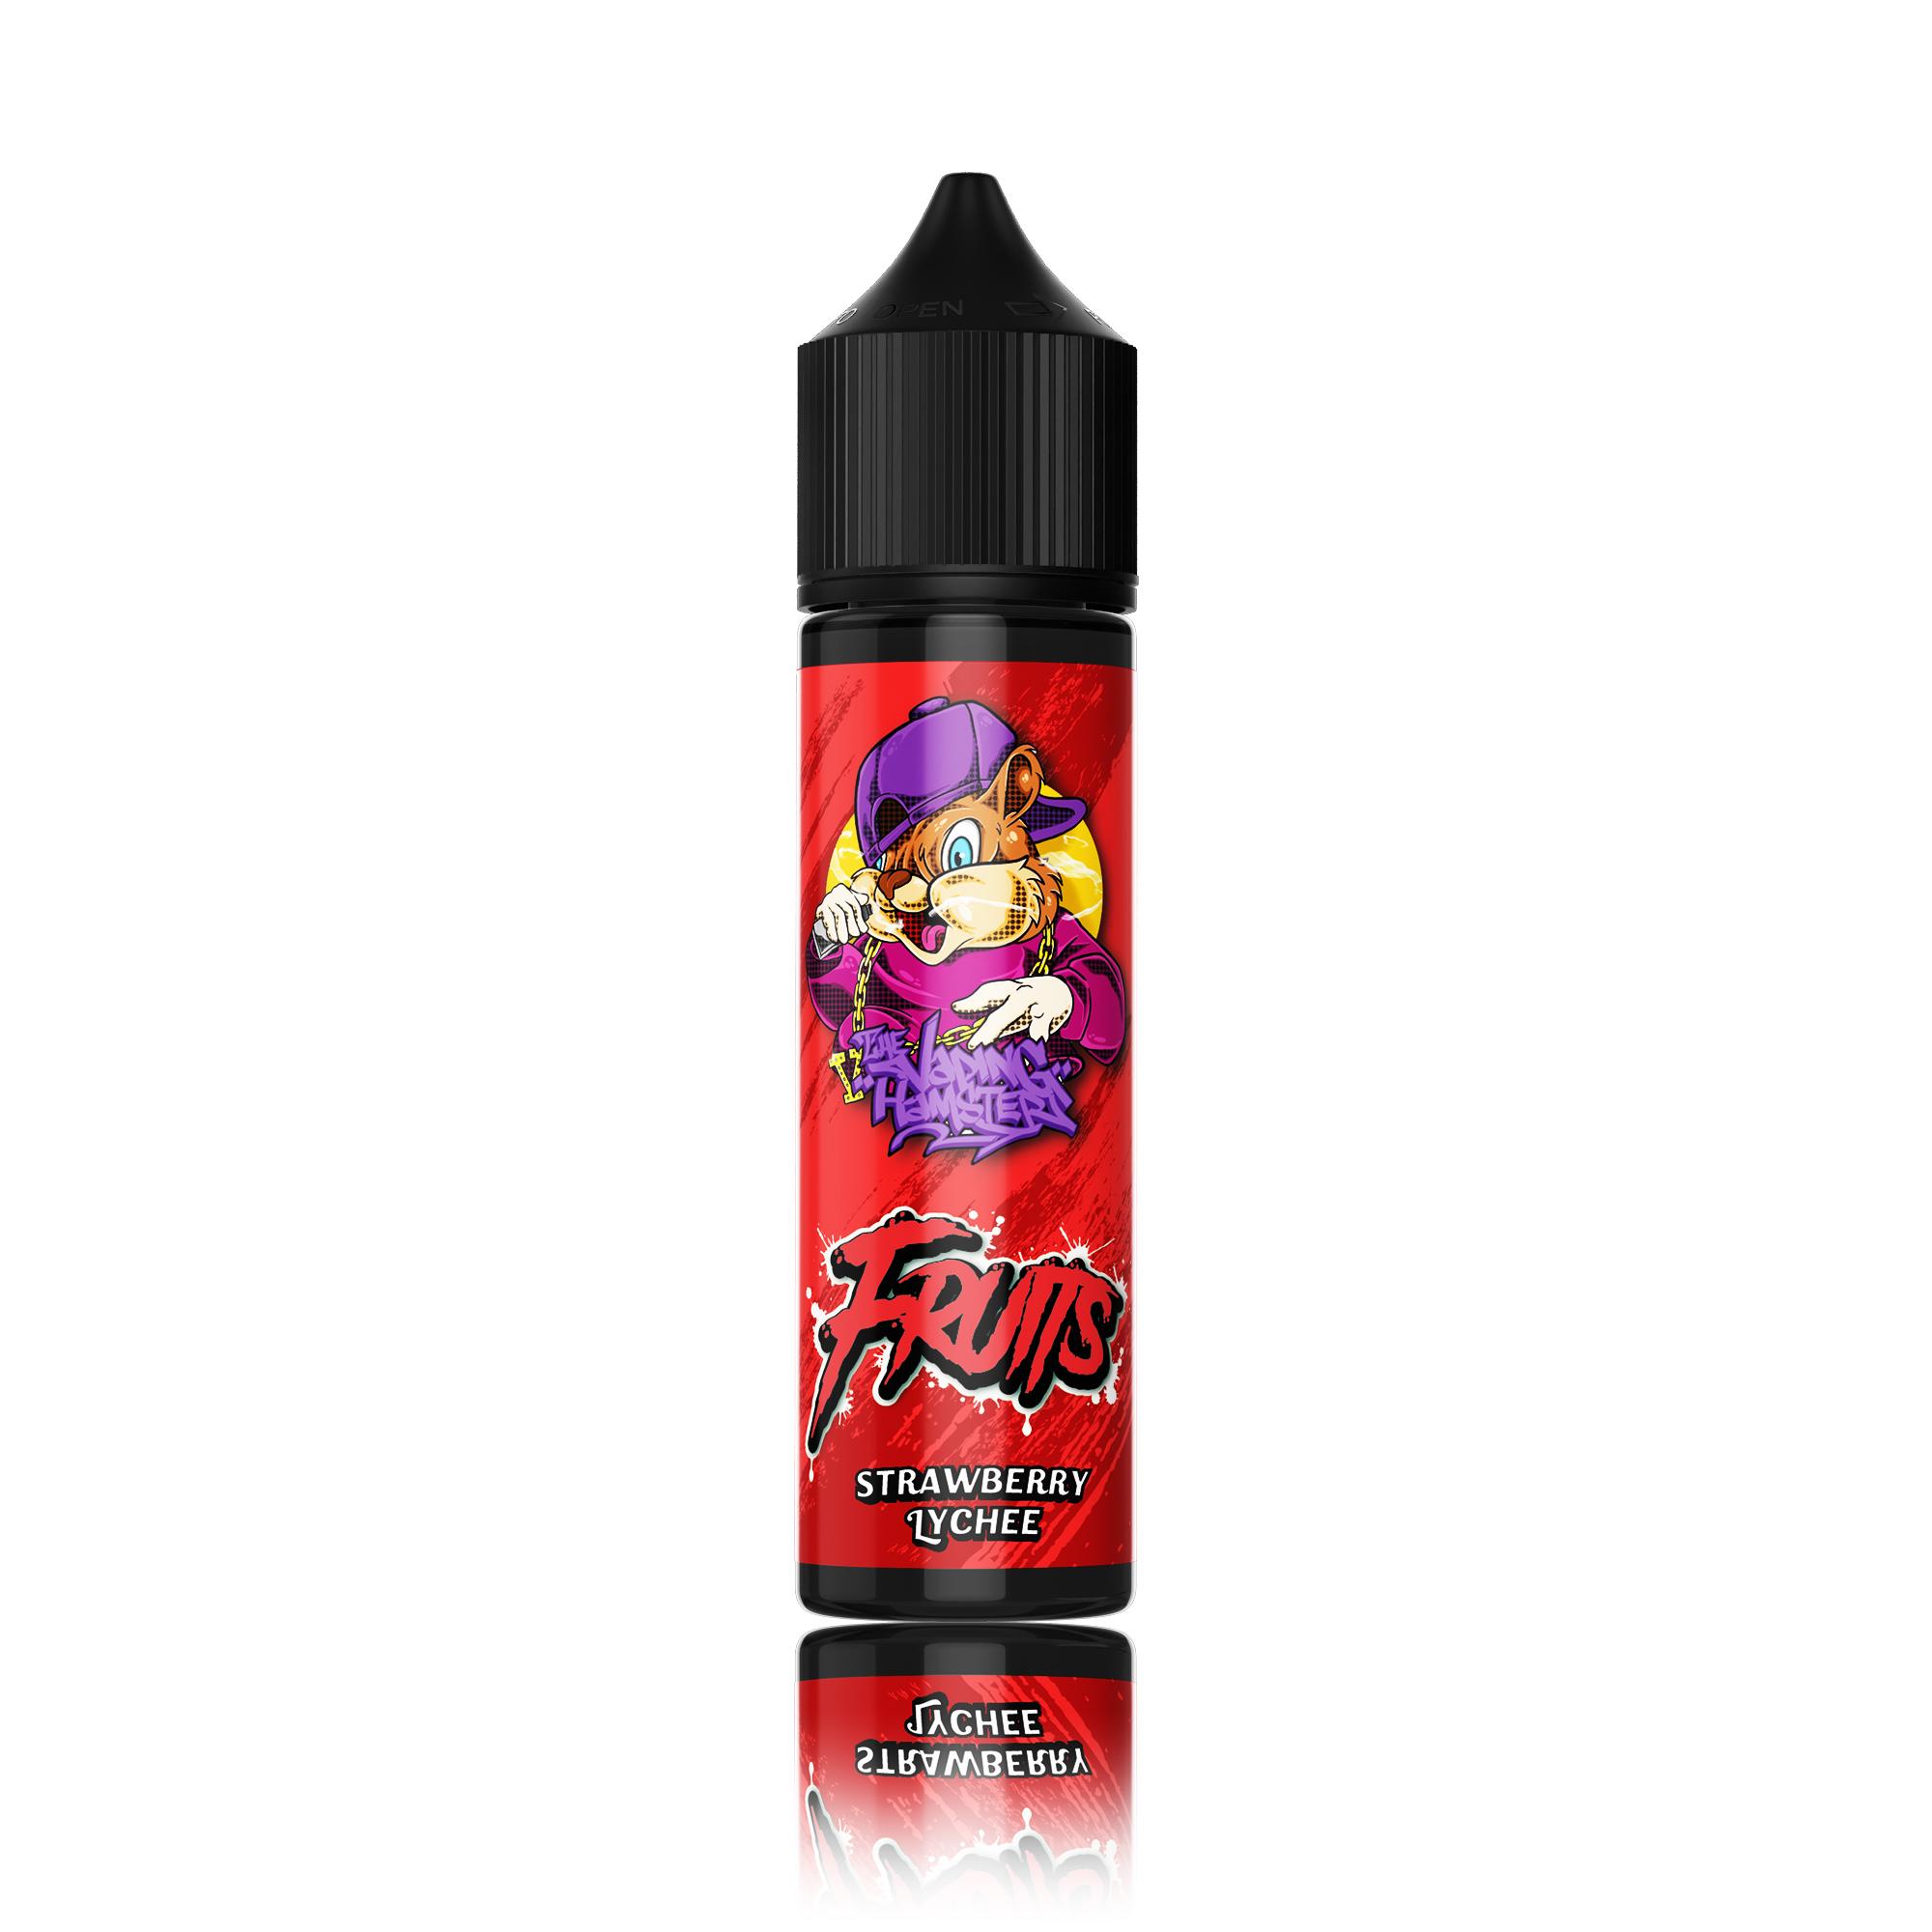 Strawberry Lychee by The Vaping Hamster